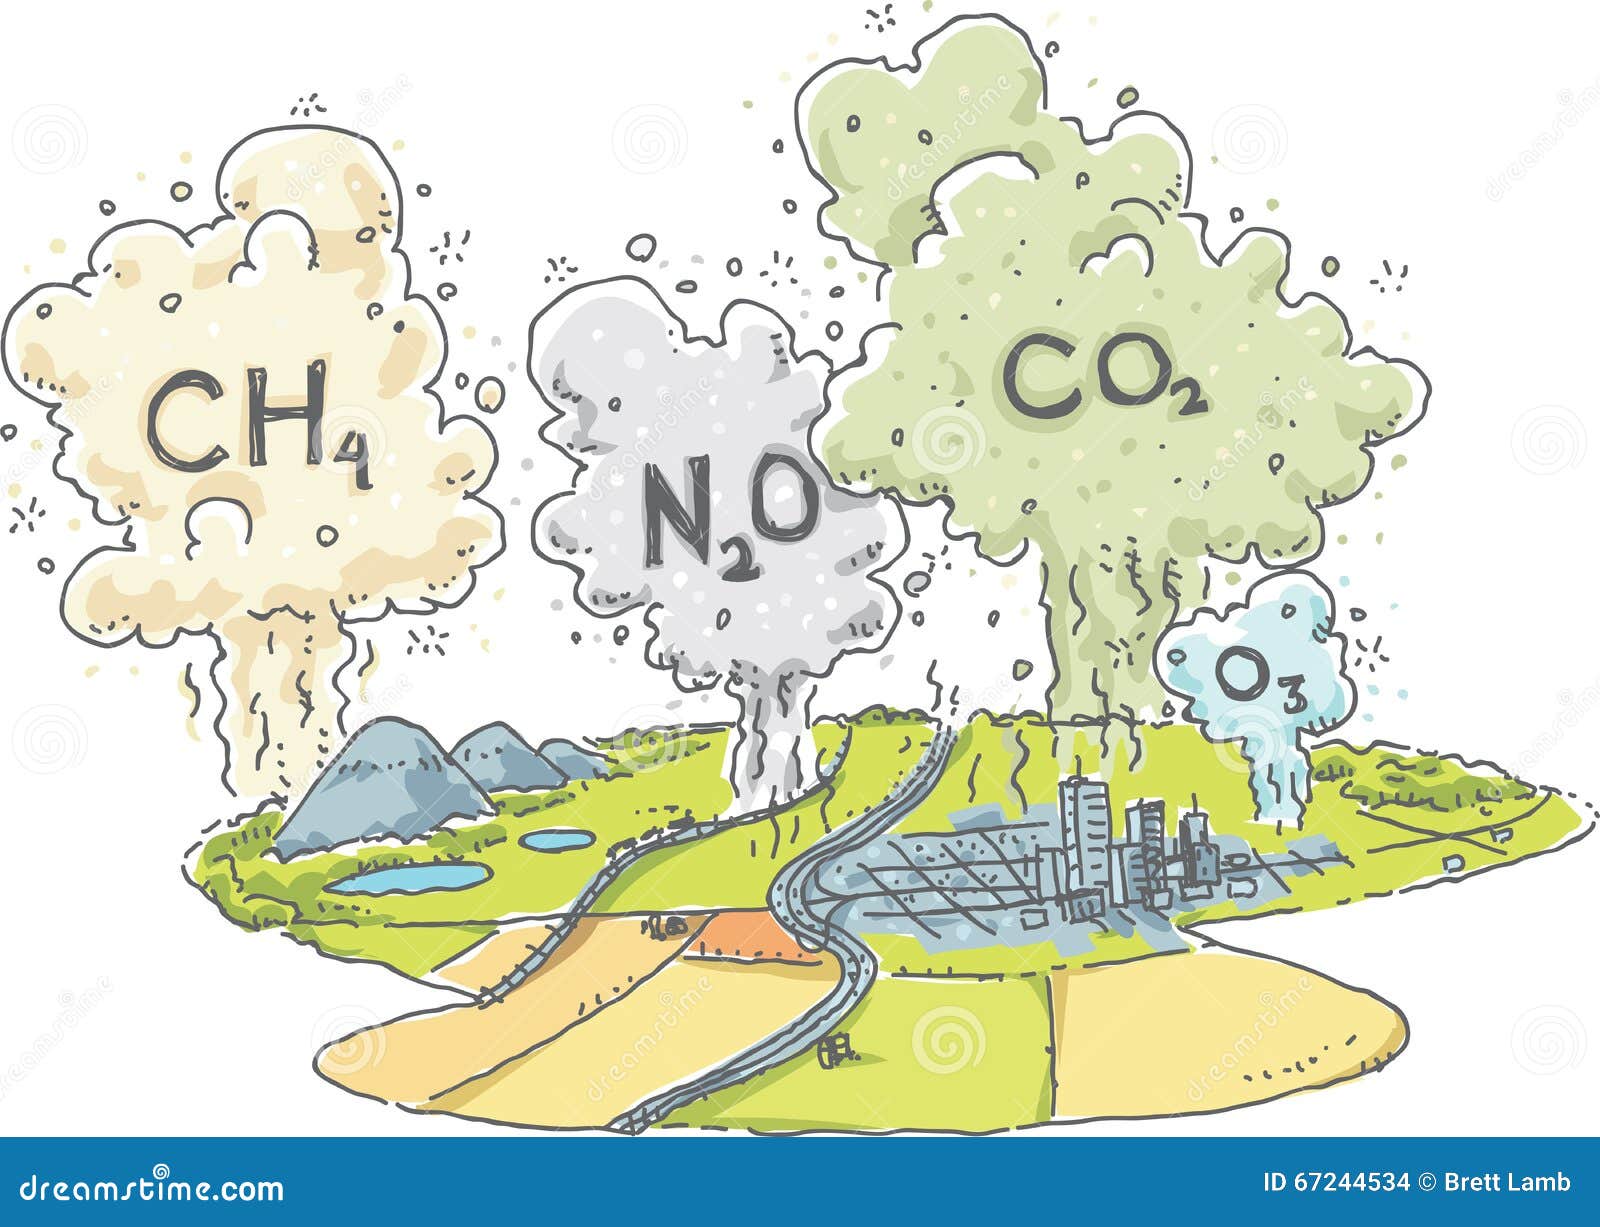 Greenhouse Gas Emissions Stock Vector - Image: 67244534